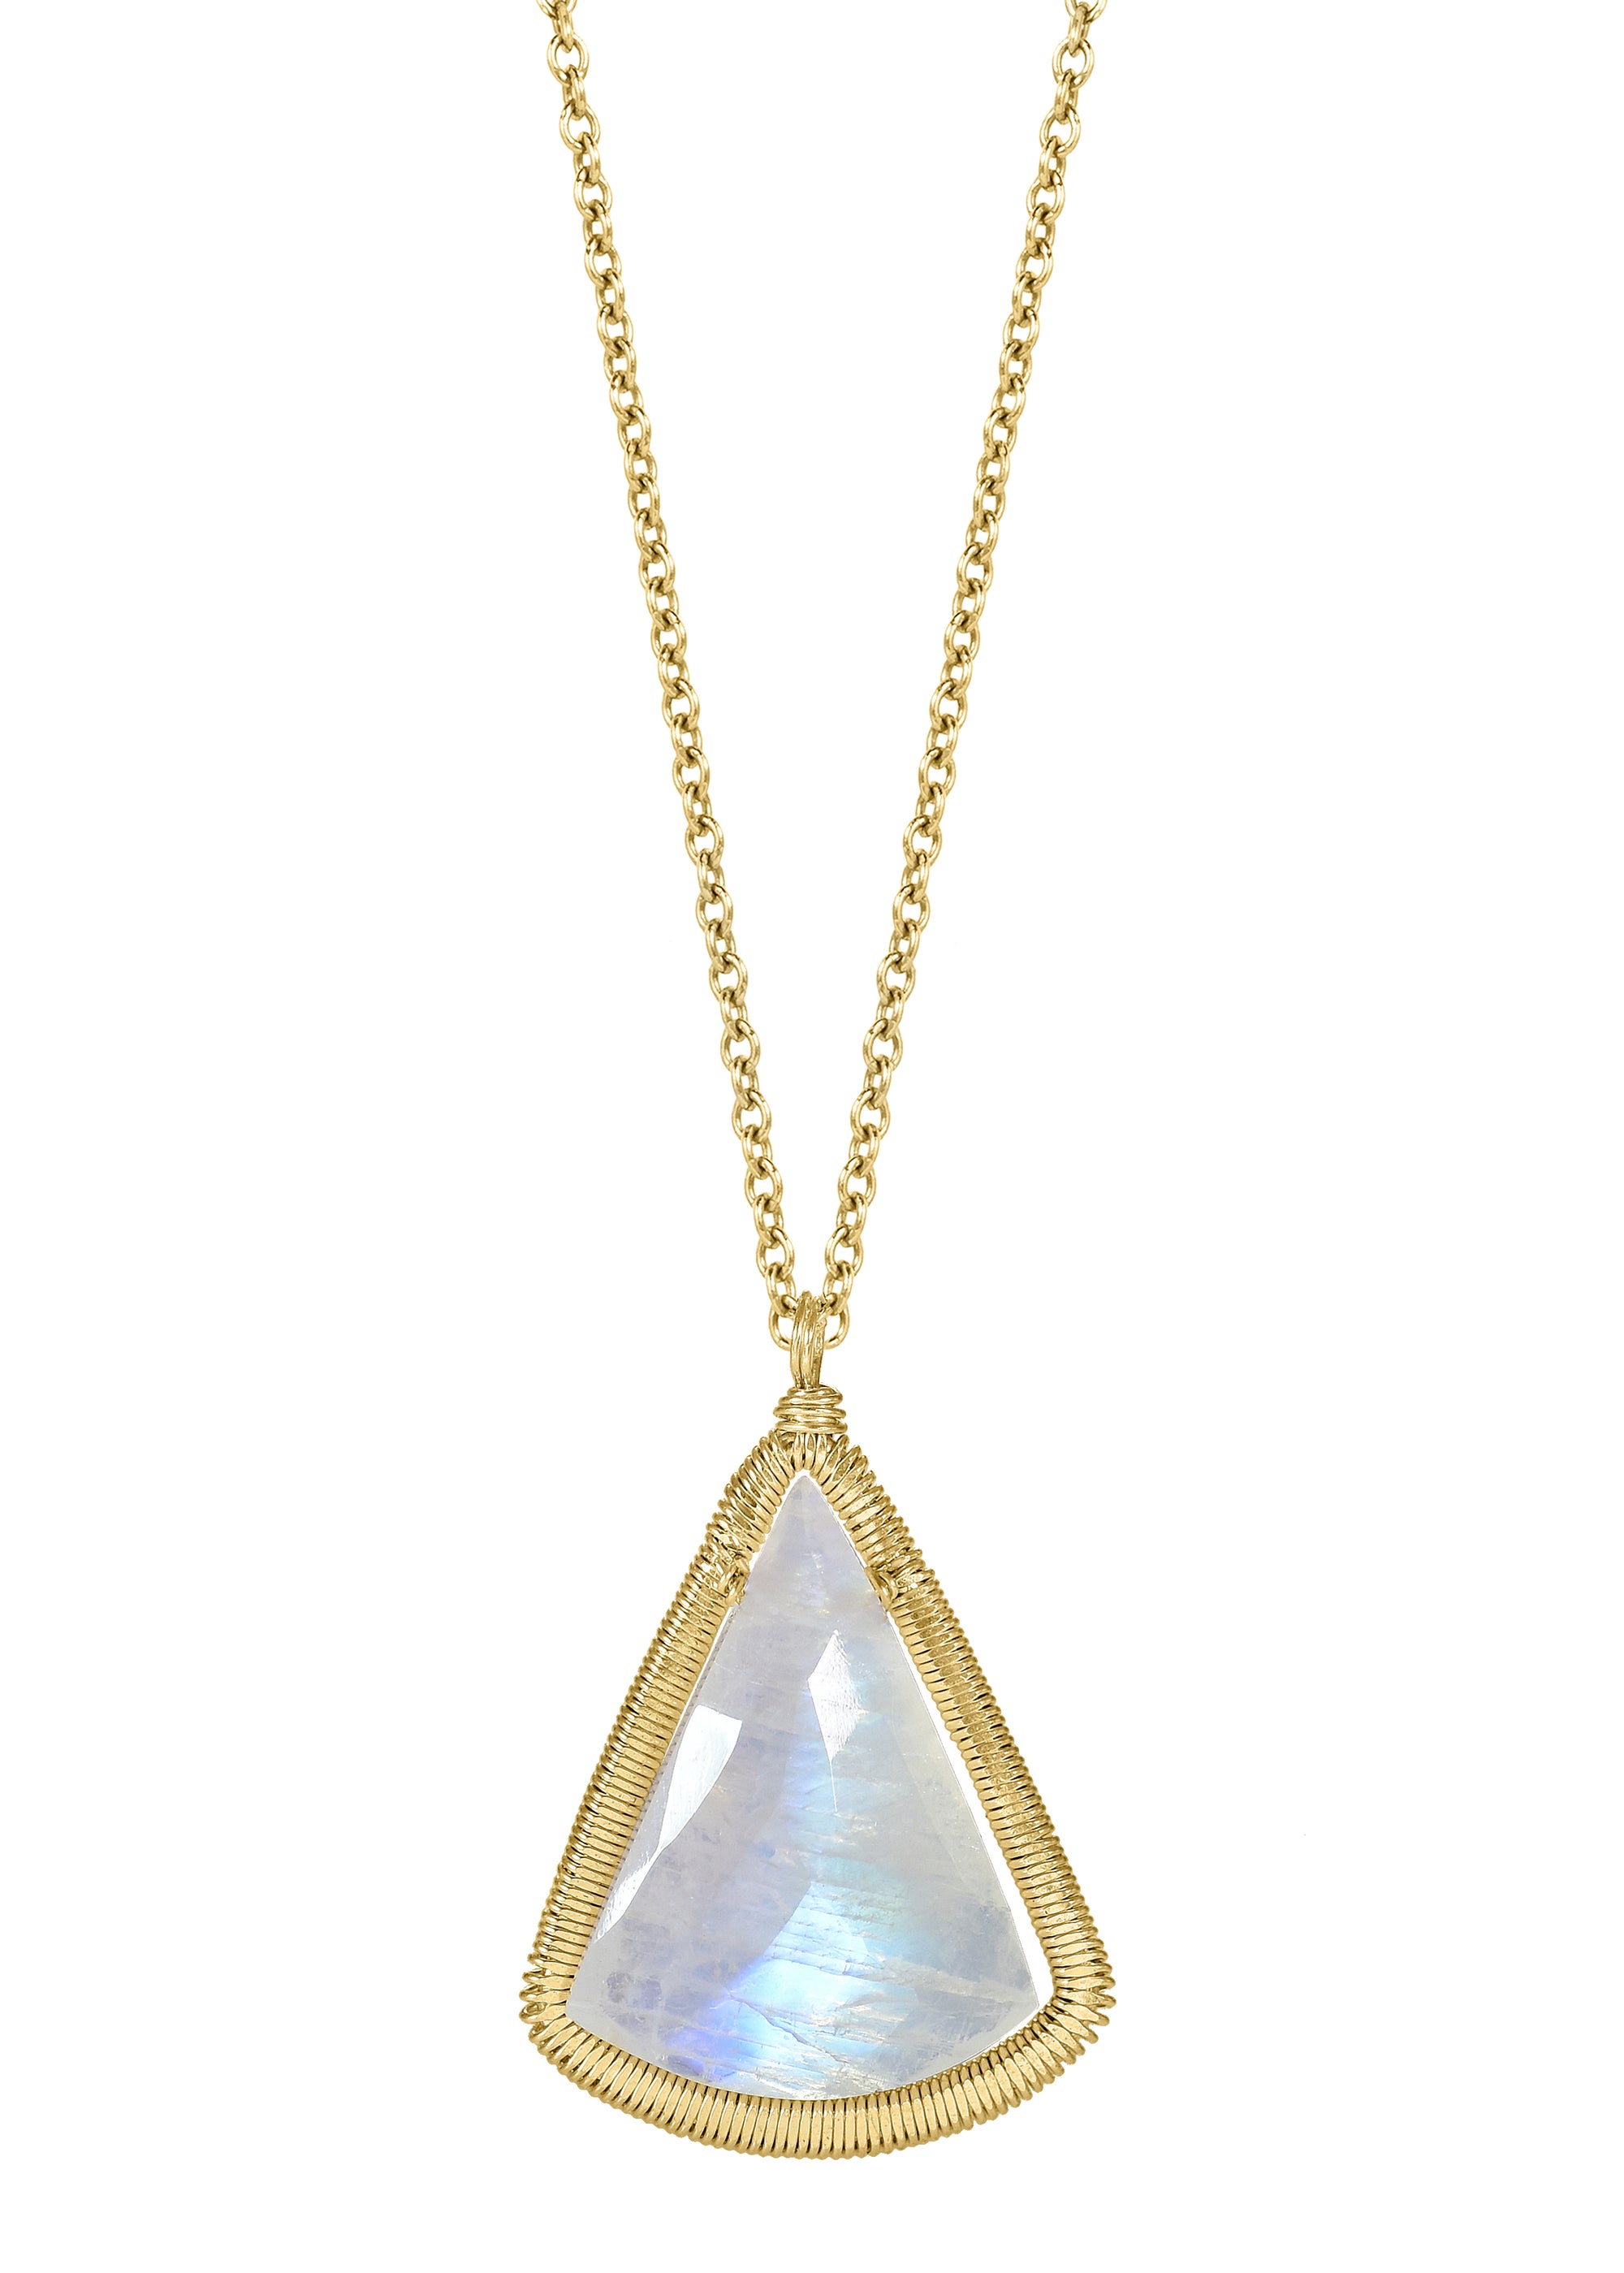 Rainbow moonstone 14k gold fill Necklace measures 17" Pendant measures 13/16" in length and 11/16" in width at the widest point Handmade in our Los Angeles studio